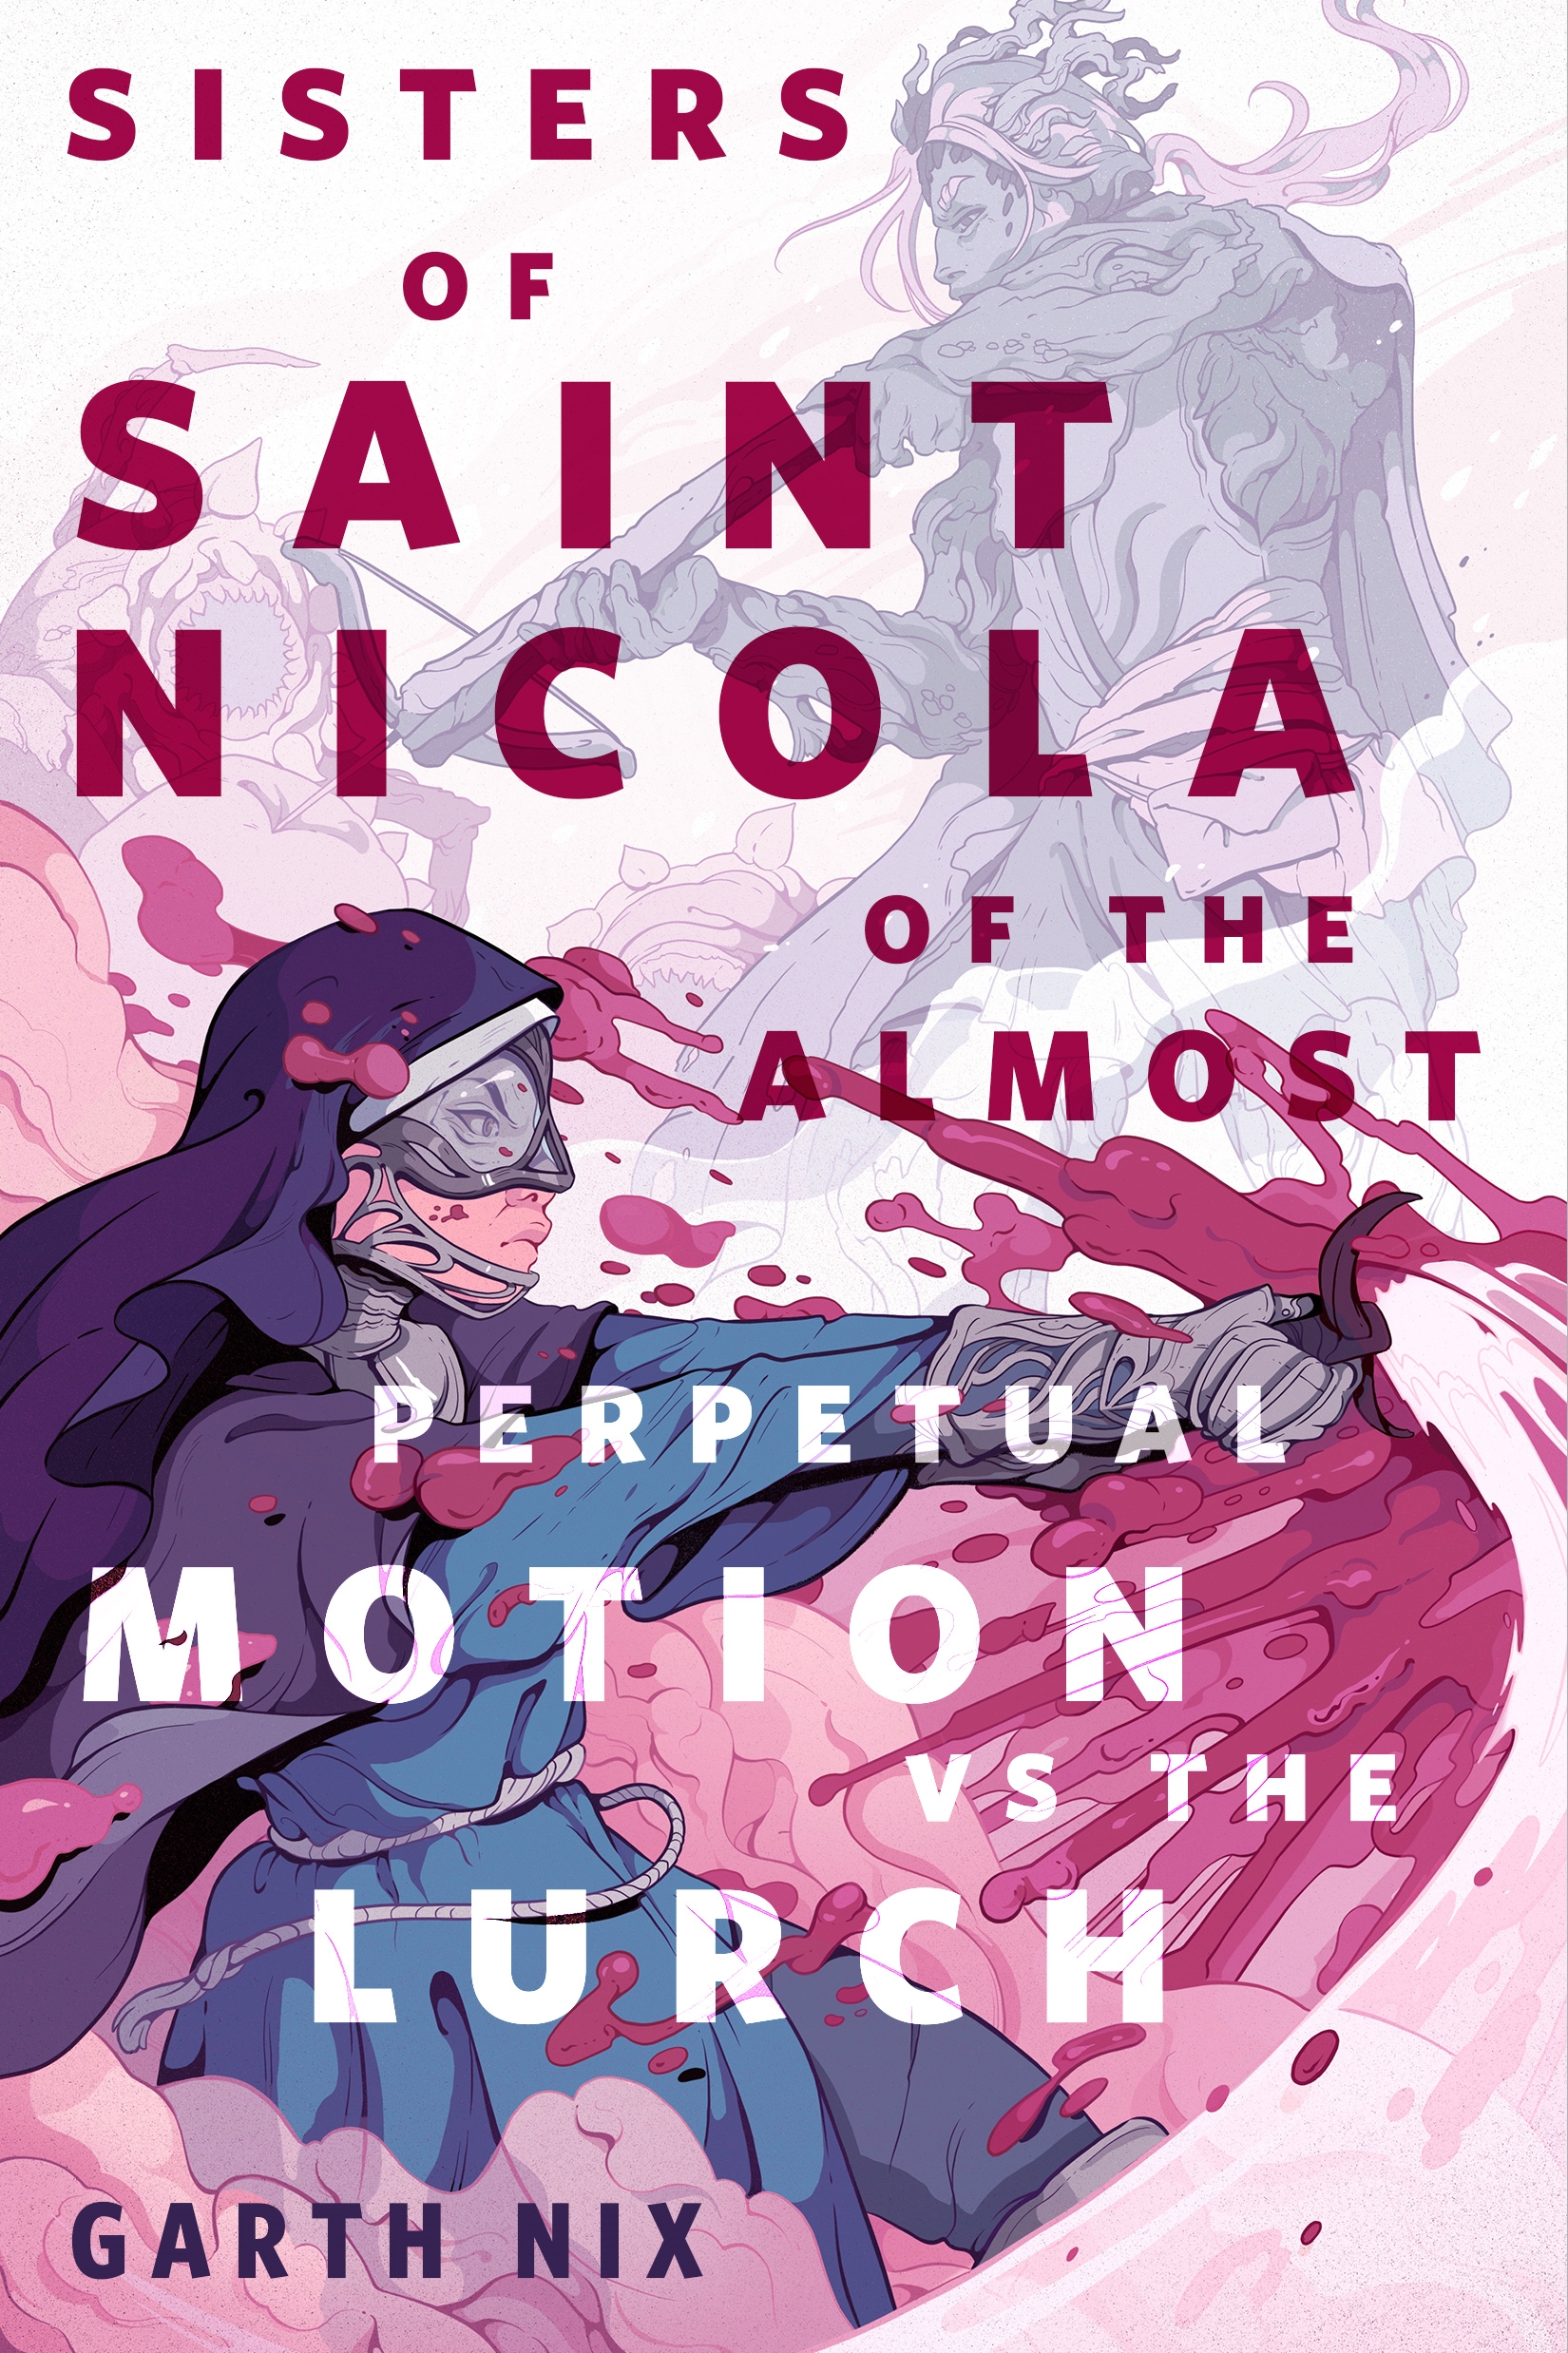 The Sisters of Saint Nicola of The Almost Perpetual Motion vs the Lurch : A Tor.com Original by Garth Nix